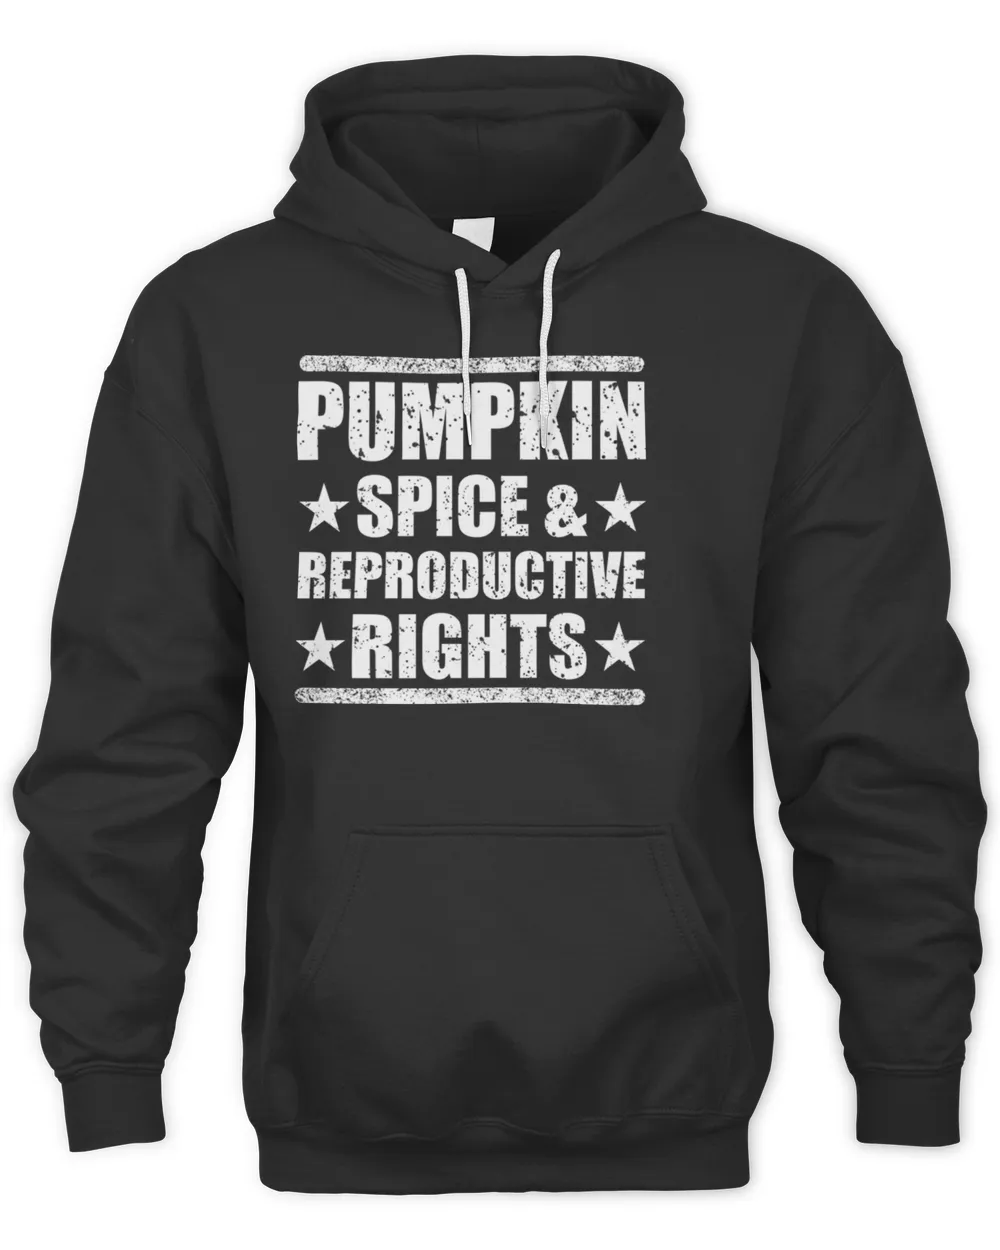 Pumpkin Spice And Reproductive Rights T-Shirt